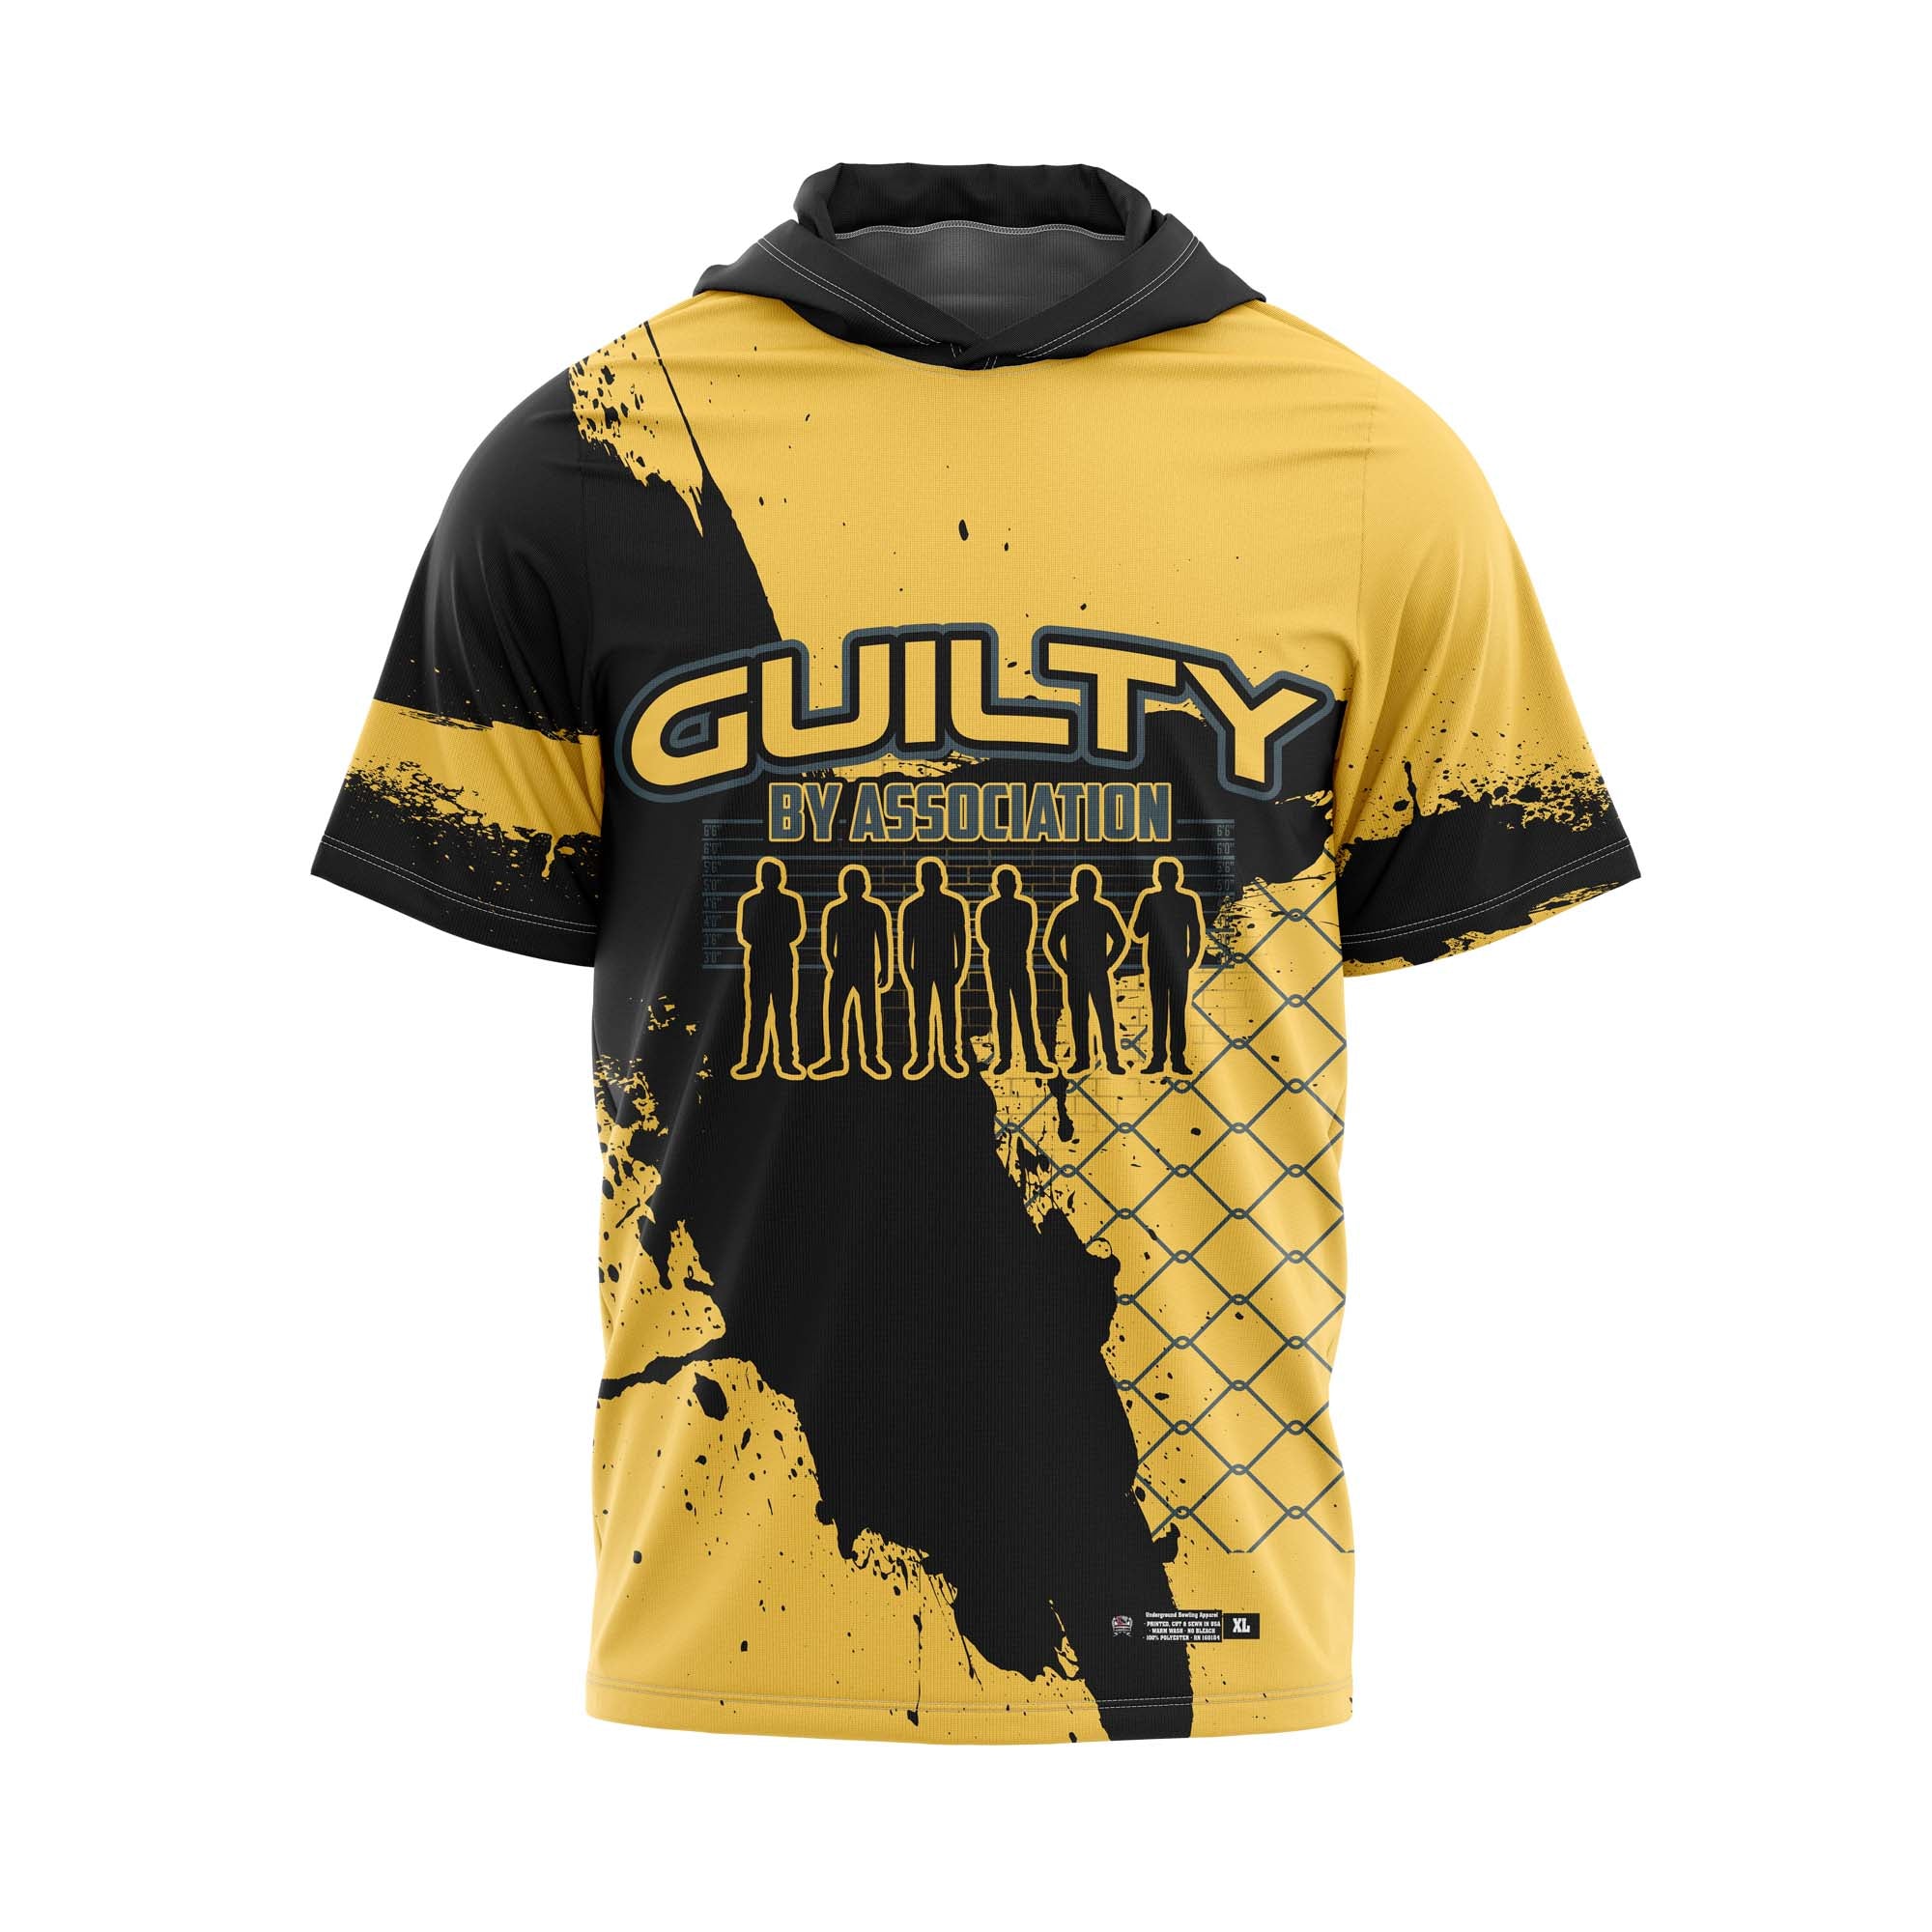 Guilty By Association Home / Main Jersey